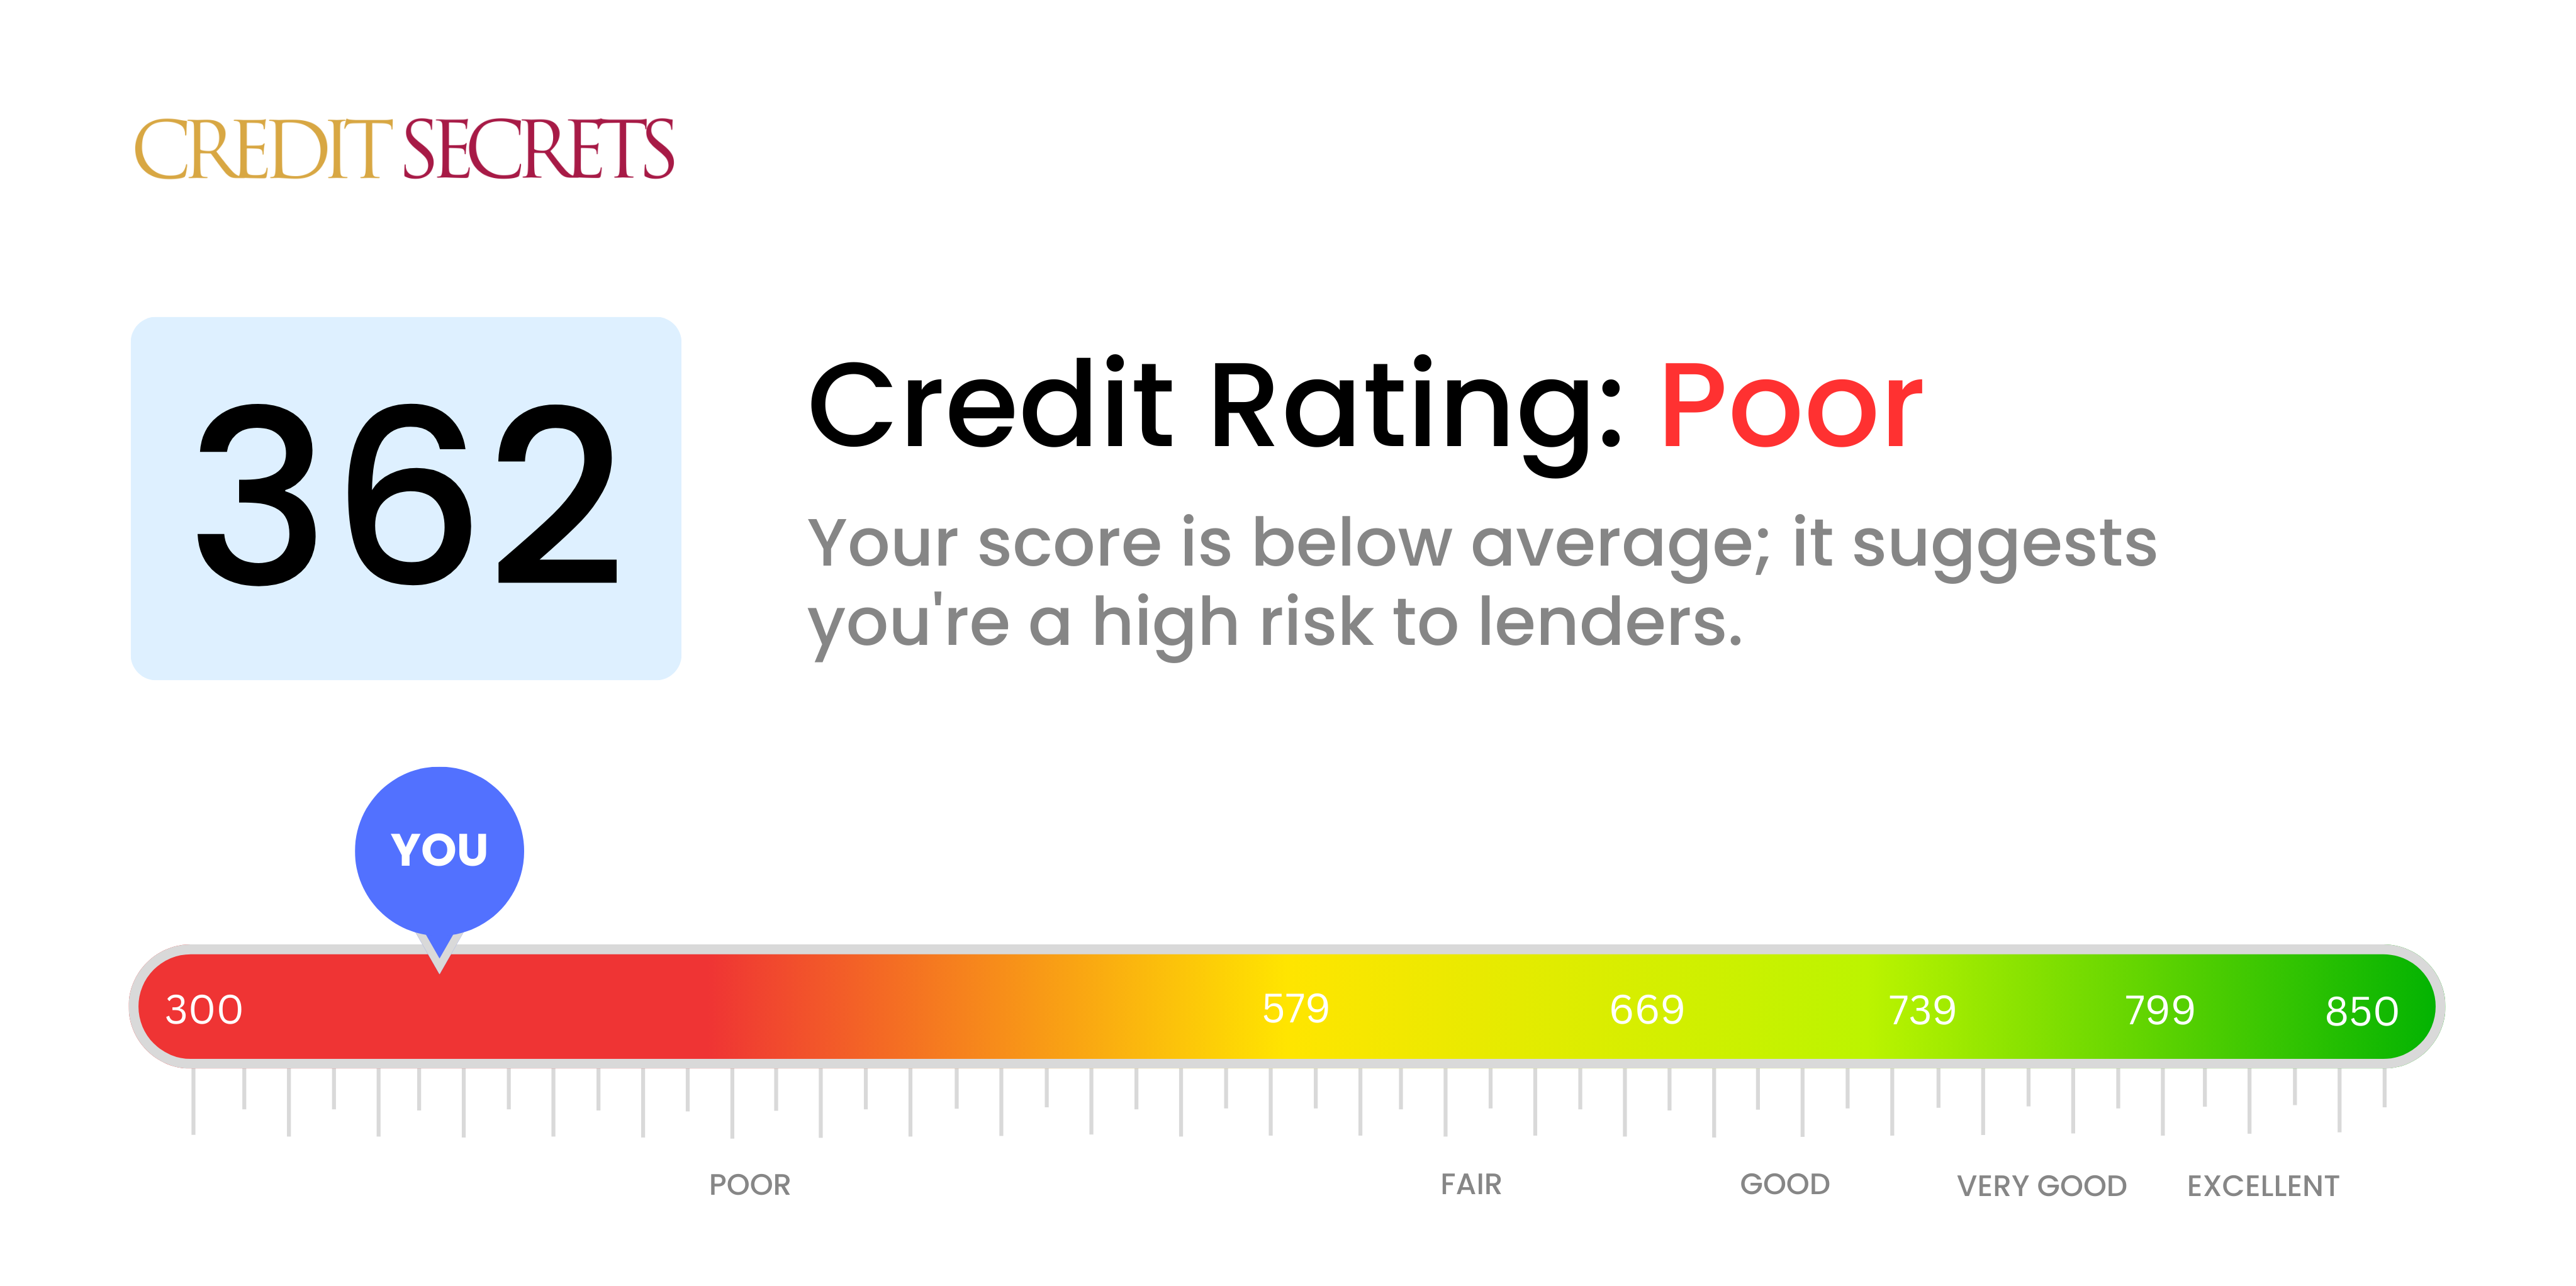 Is 362 a good credit score?